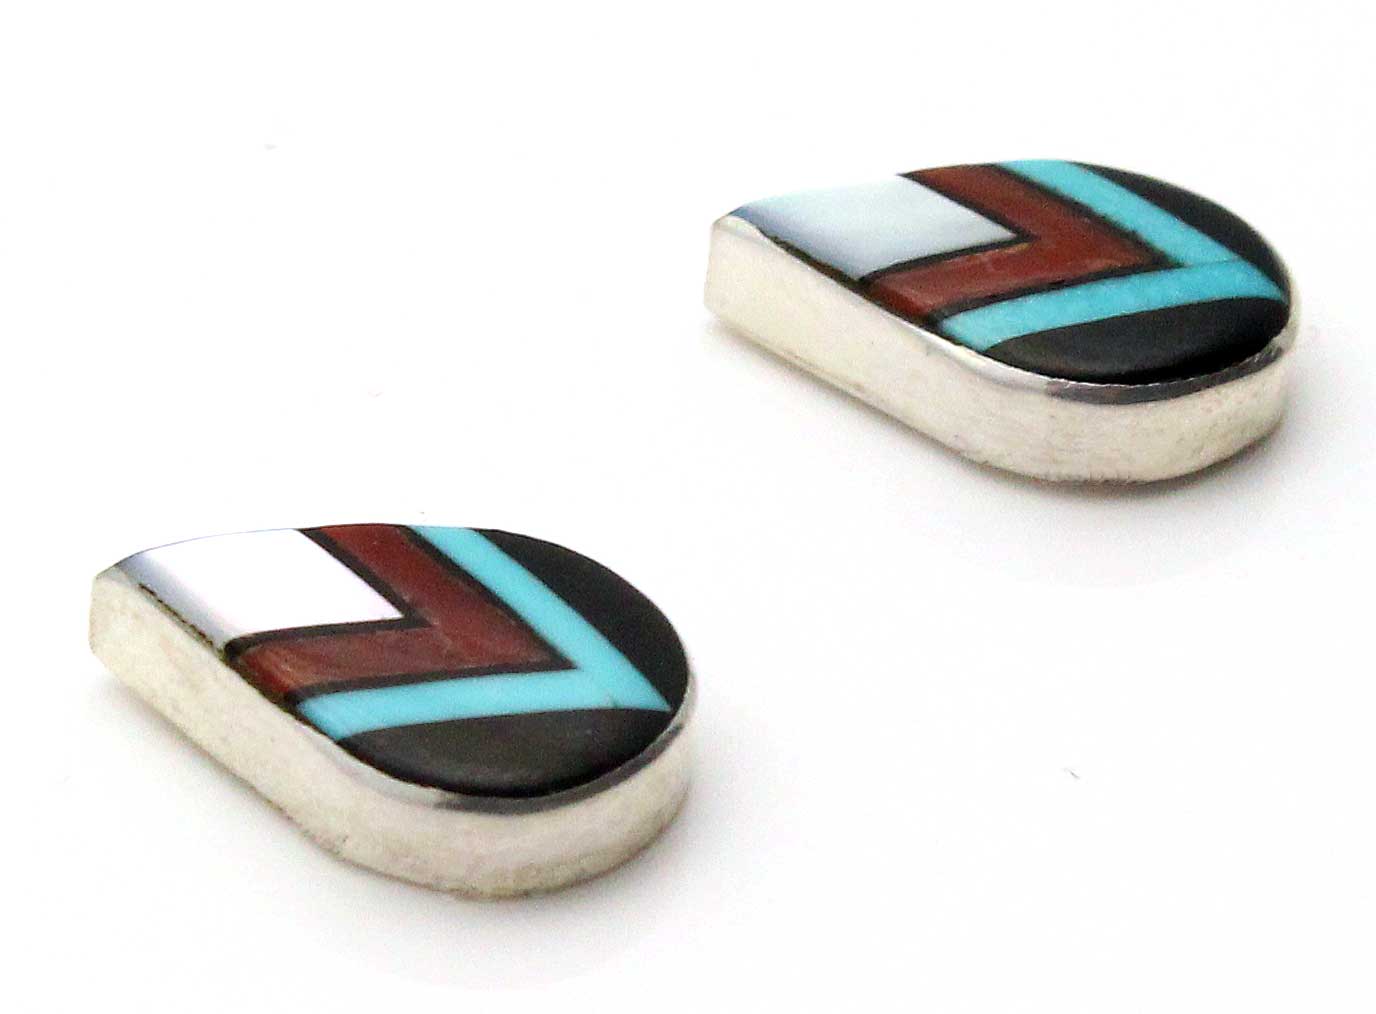 Zuni Multi Color Inlay Stud Earrings by Cheama